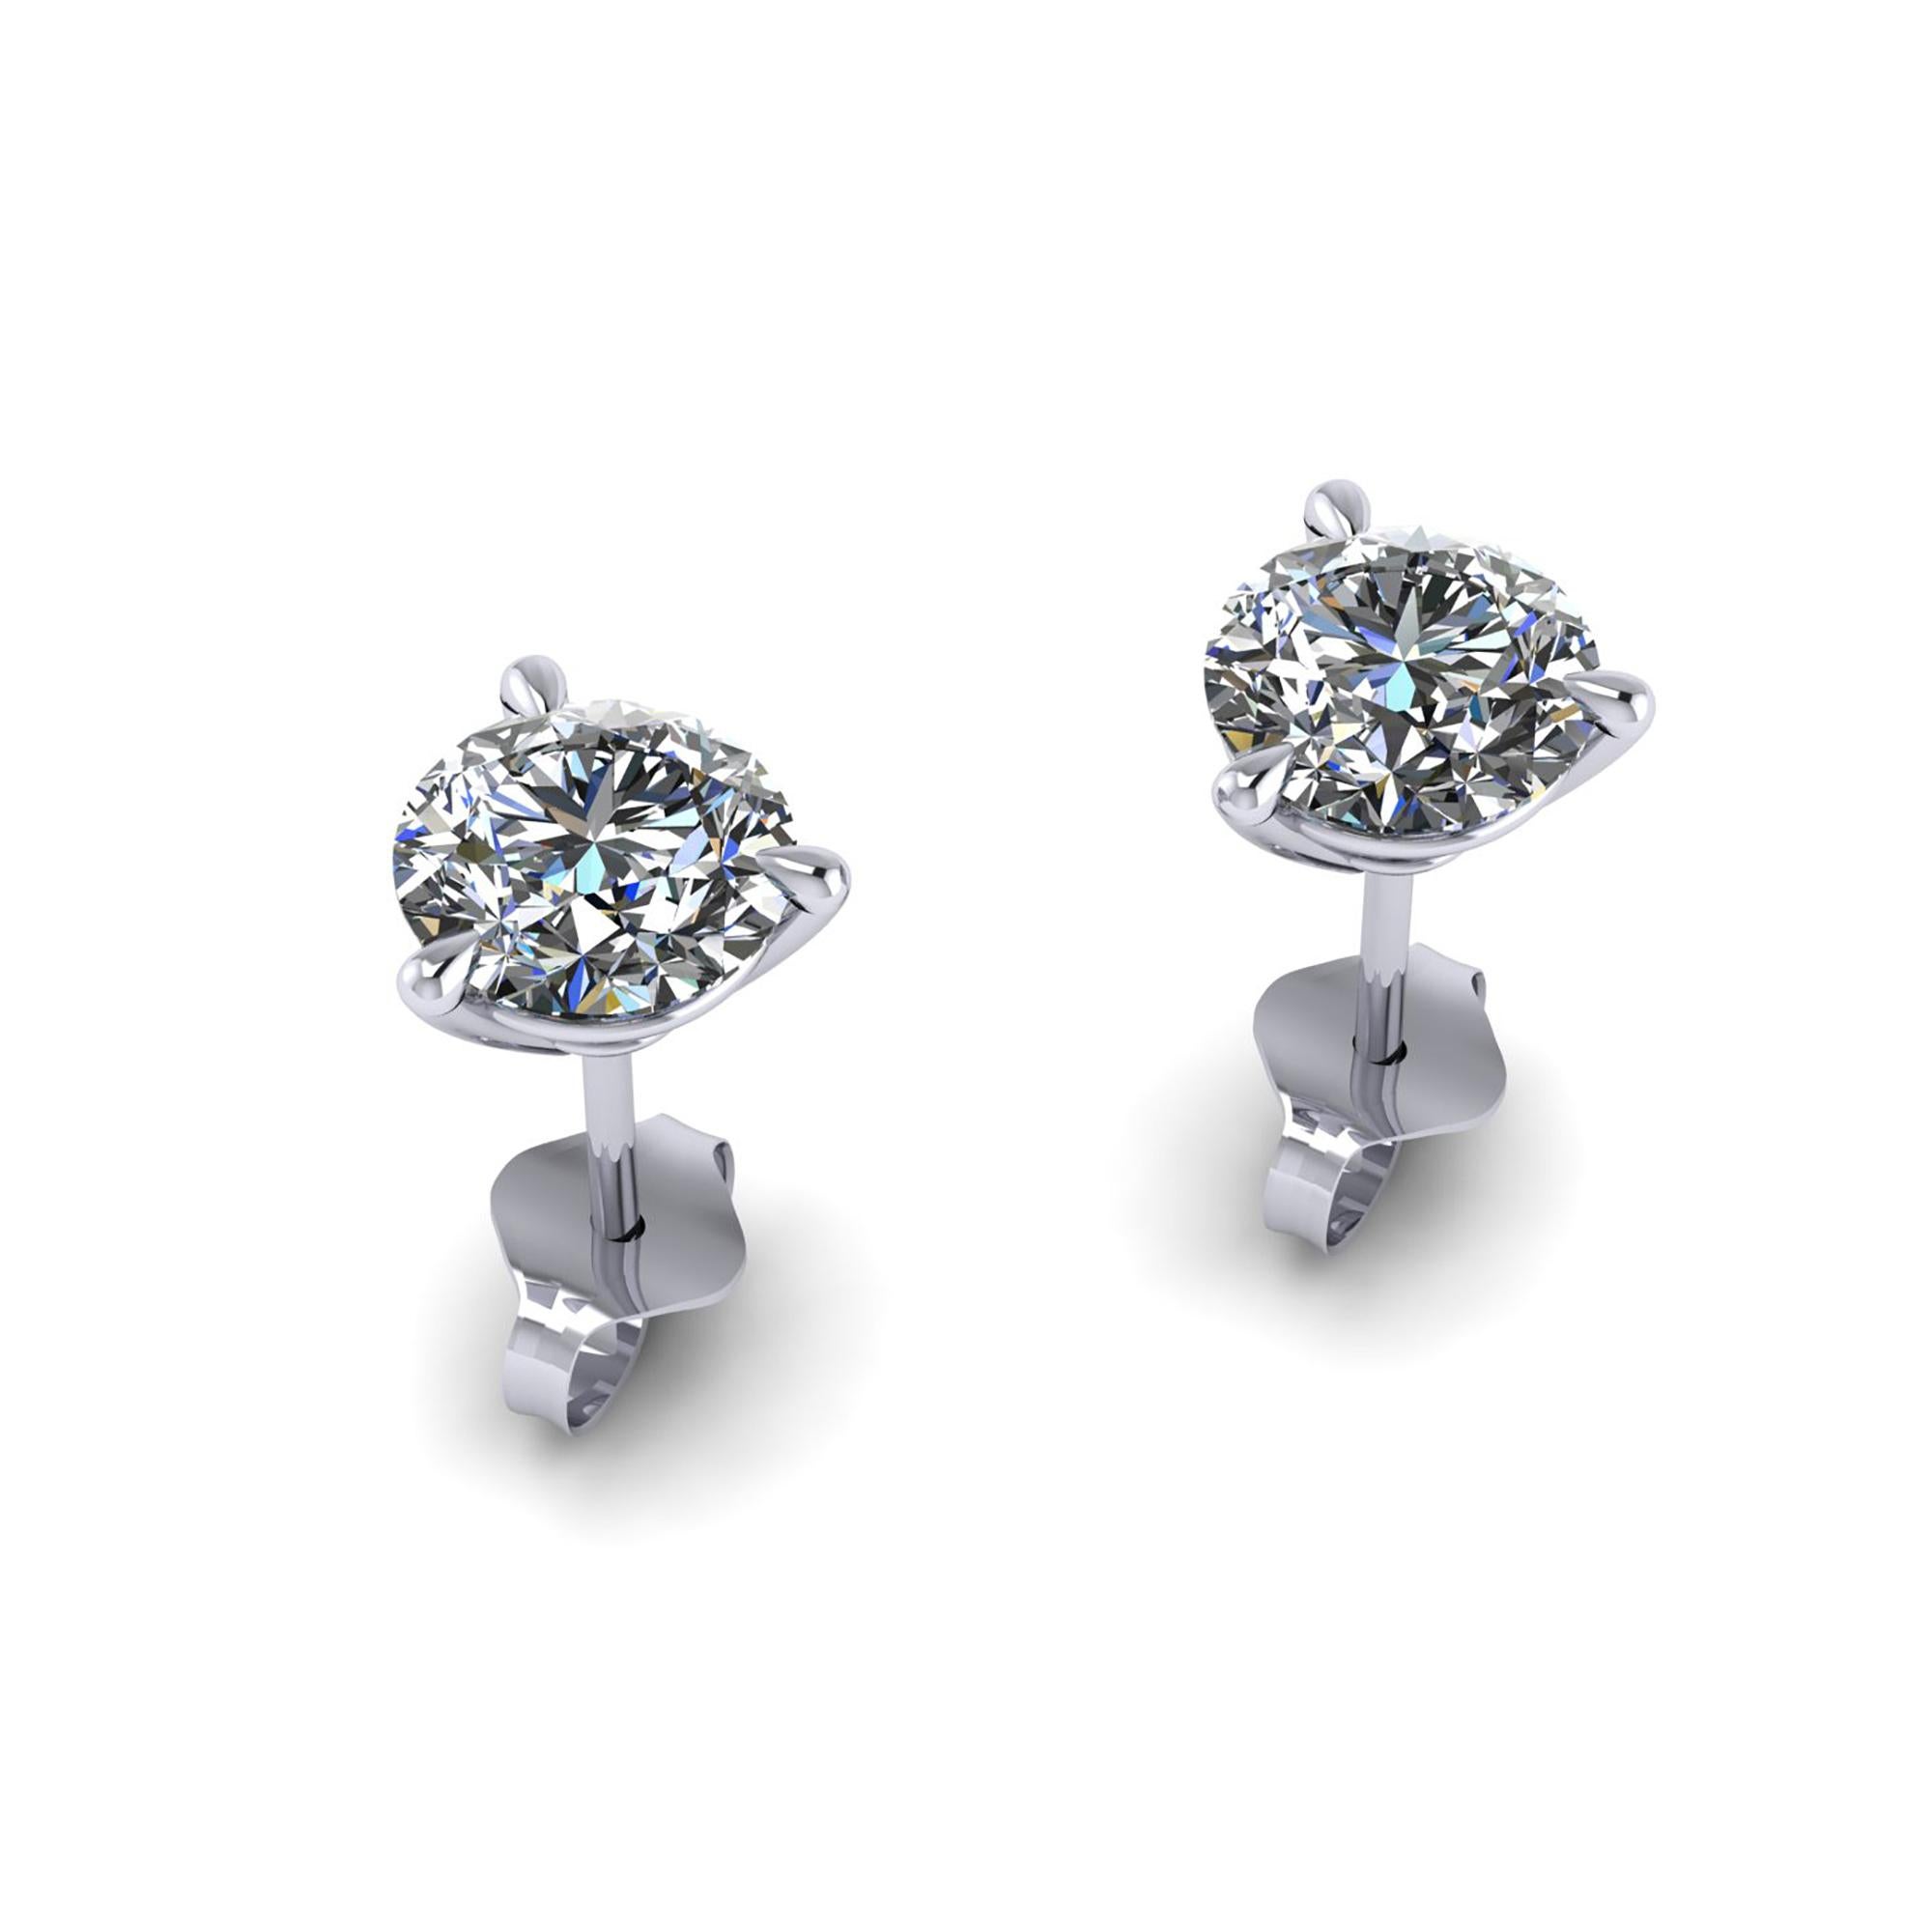 GIA Certified 2.02 Carat total, Round Diamonds E color, VS1 and VS2 clarity, Triple Excellent,  Martini Studs made in Platinum in New York by Italian designer, Low setting style, pret-a-porter, easy to wear, ideal for every day.
Purest diamonds,